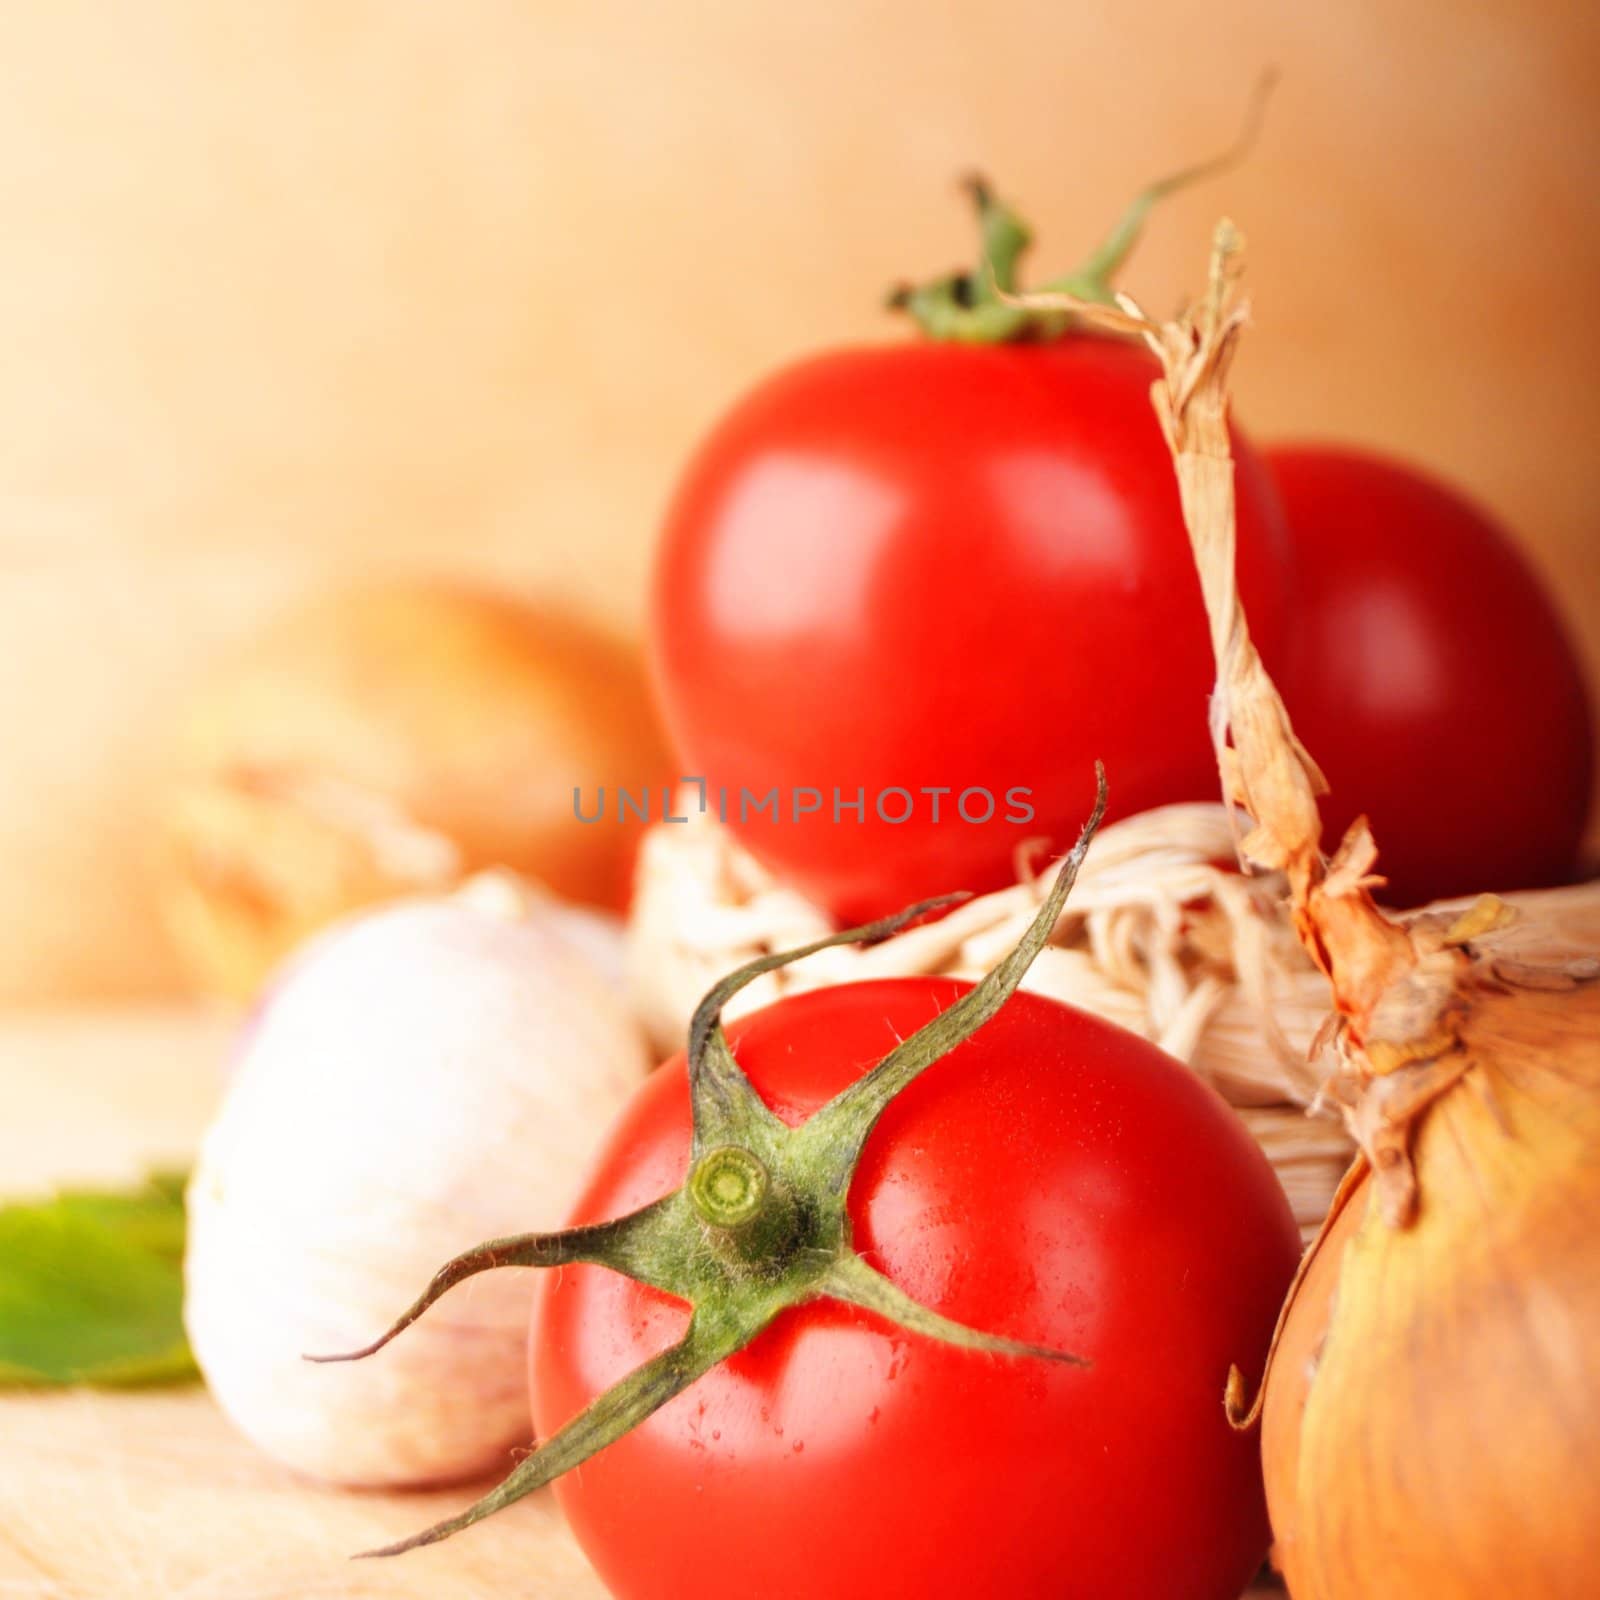 tomatoes and garlic in kitchen on wood with copyspace